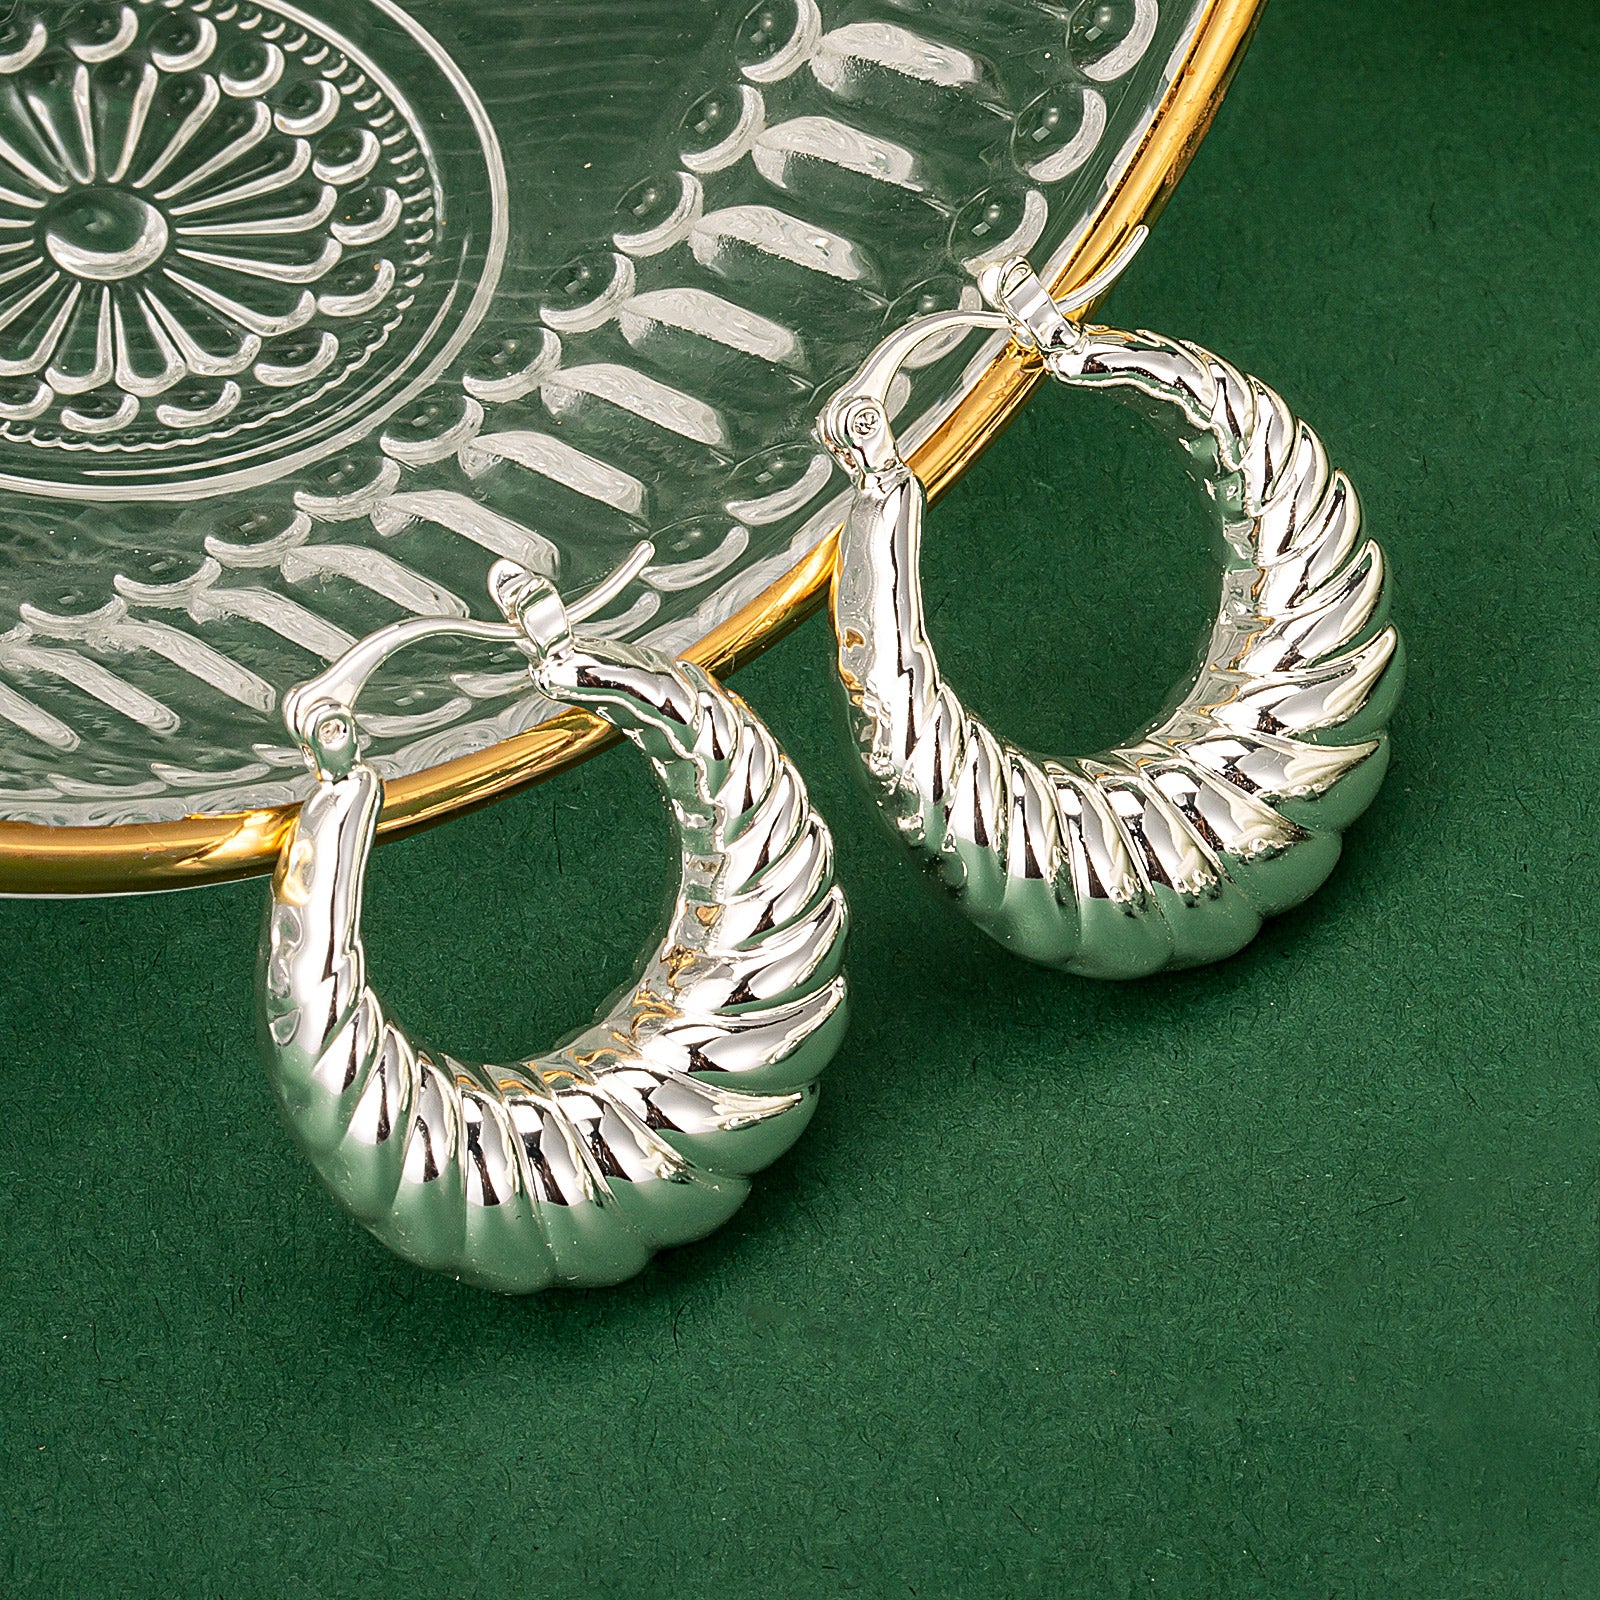 Dome Ridge Hoop Earrings with a chic appeal, these hoops bring a touch of trendiness to your style, making them a fashionable and eye-catching choice